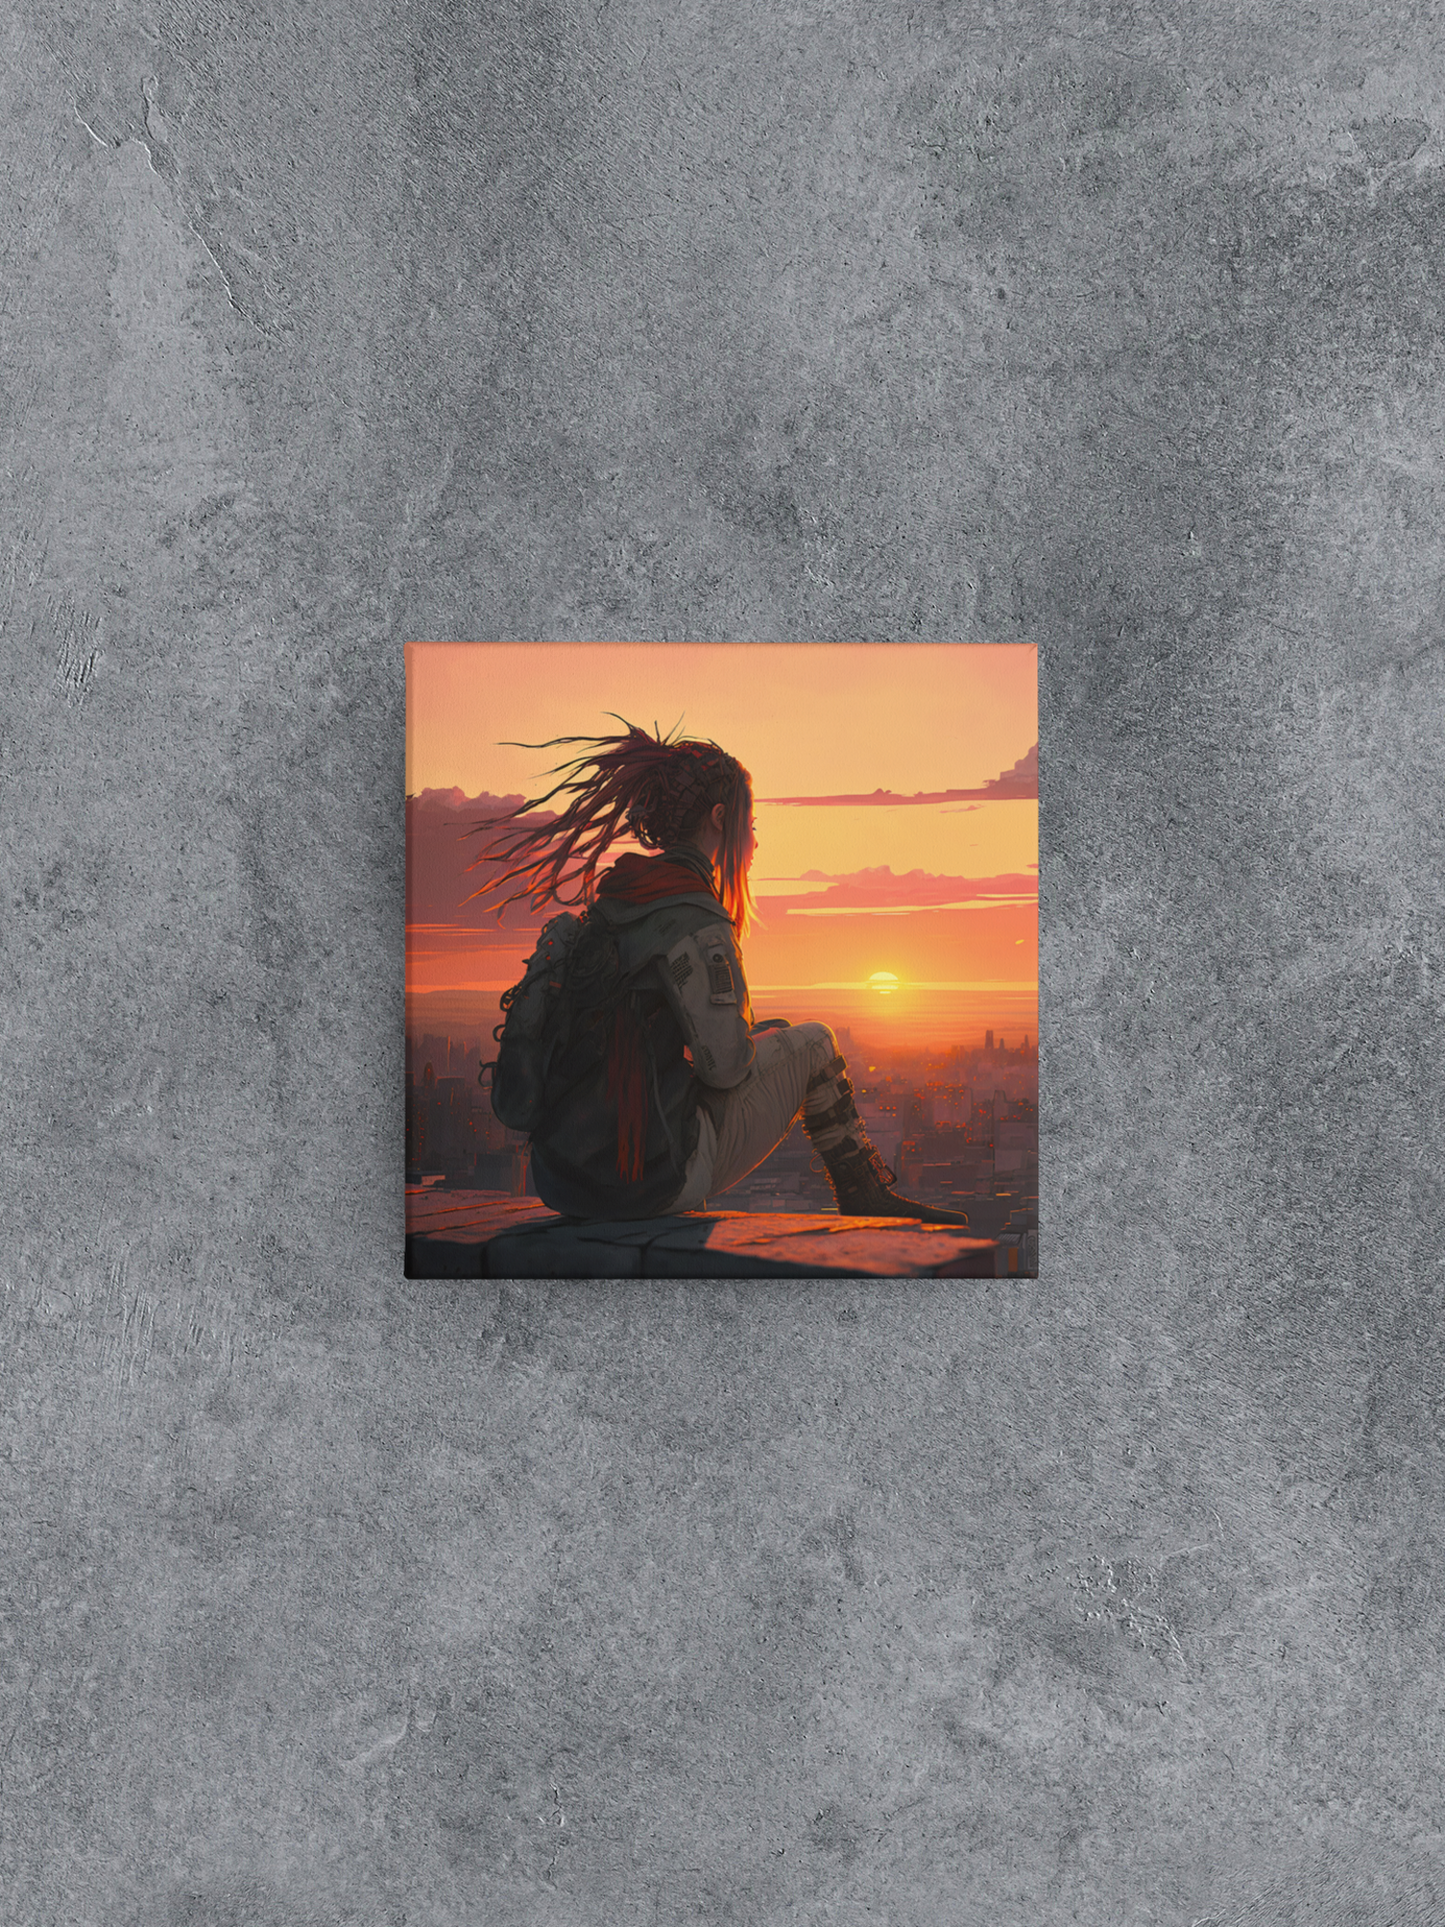 Cyberpunk Girl on Rooftop with Orange Sunset Canvas Wall Art, Dystopian Canvas Wall Decor, Cyberpunk Canvas Print, Rooftop View of City